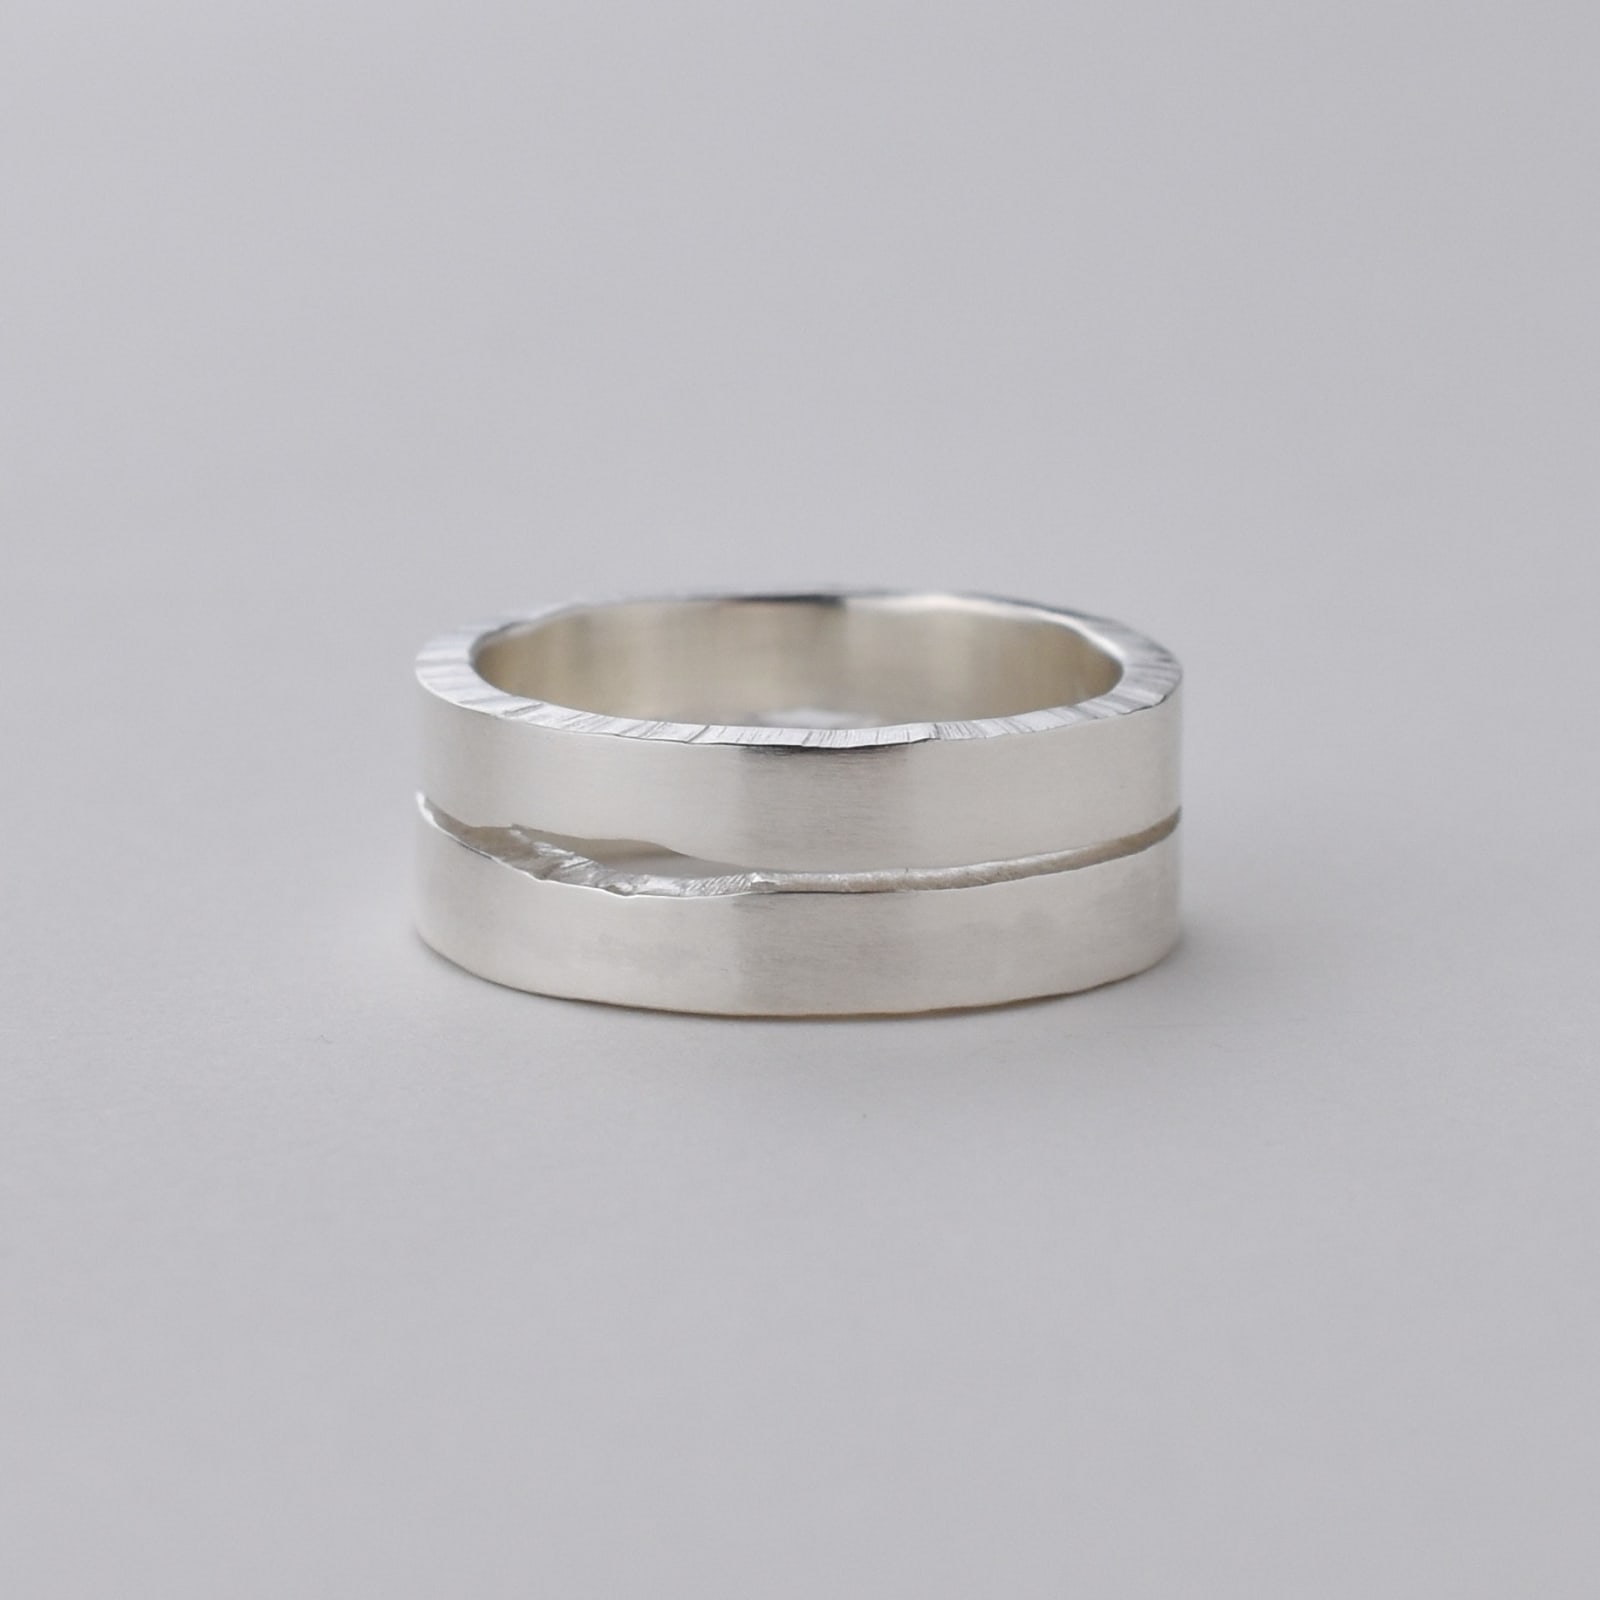 Catherine Hartley, Peek Ring, 2021 | Contemporary Applied Arts